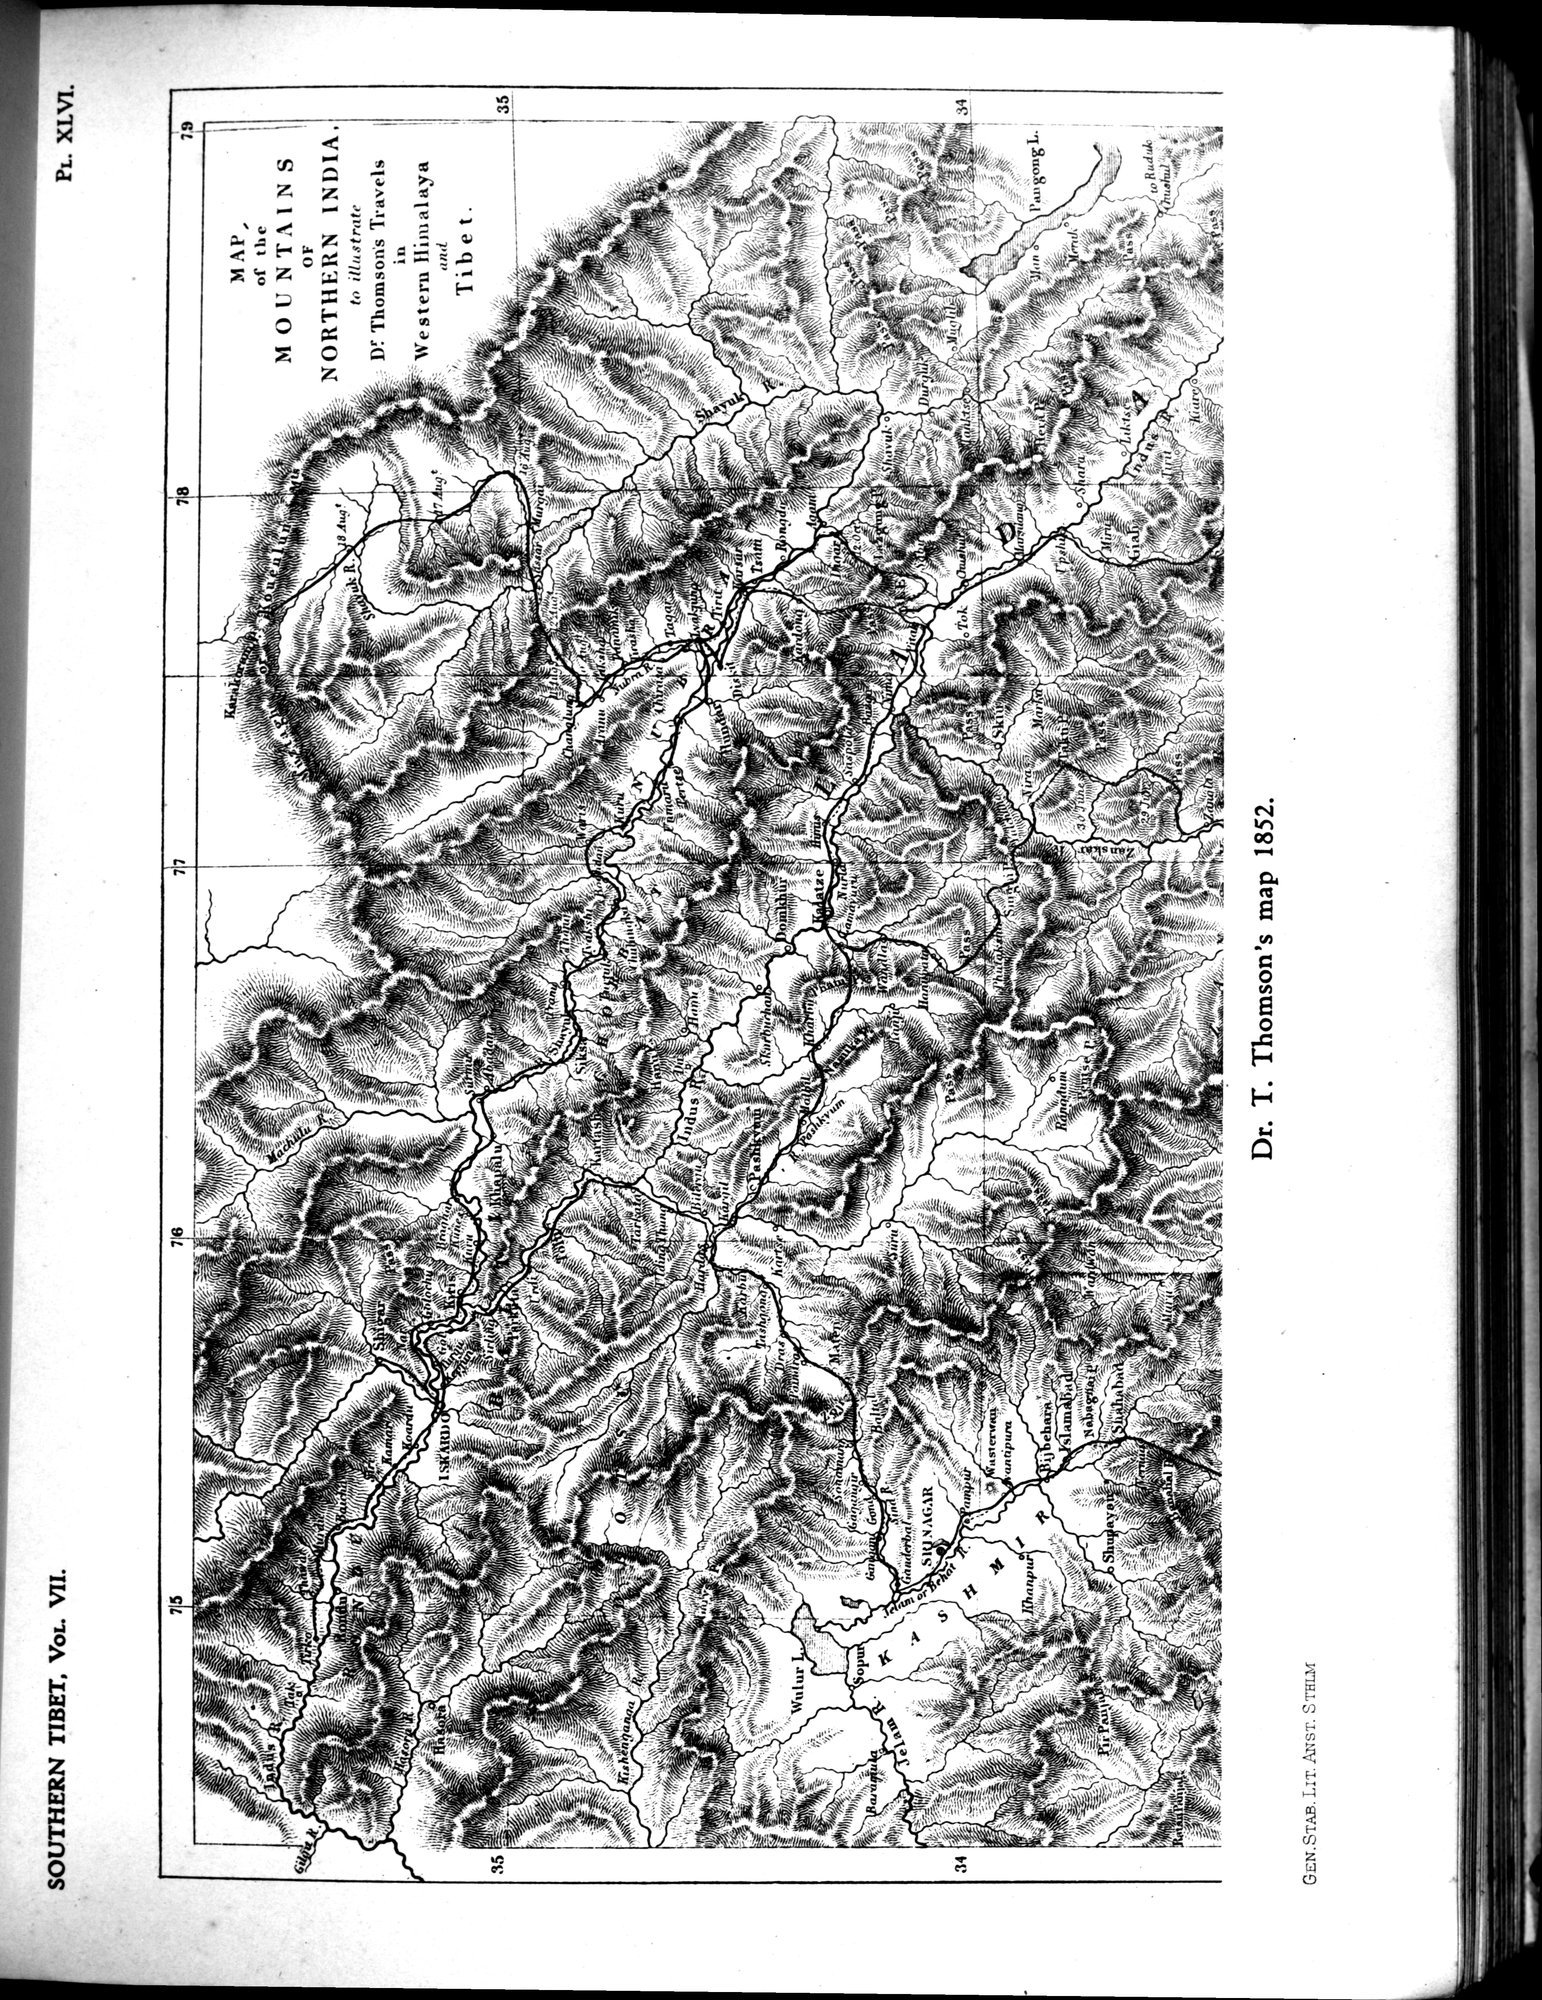 Southern Tibet : vol.7 / Page 319 (Grayscale High Resolution Image)